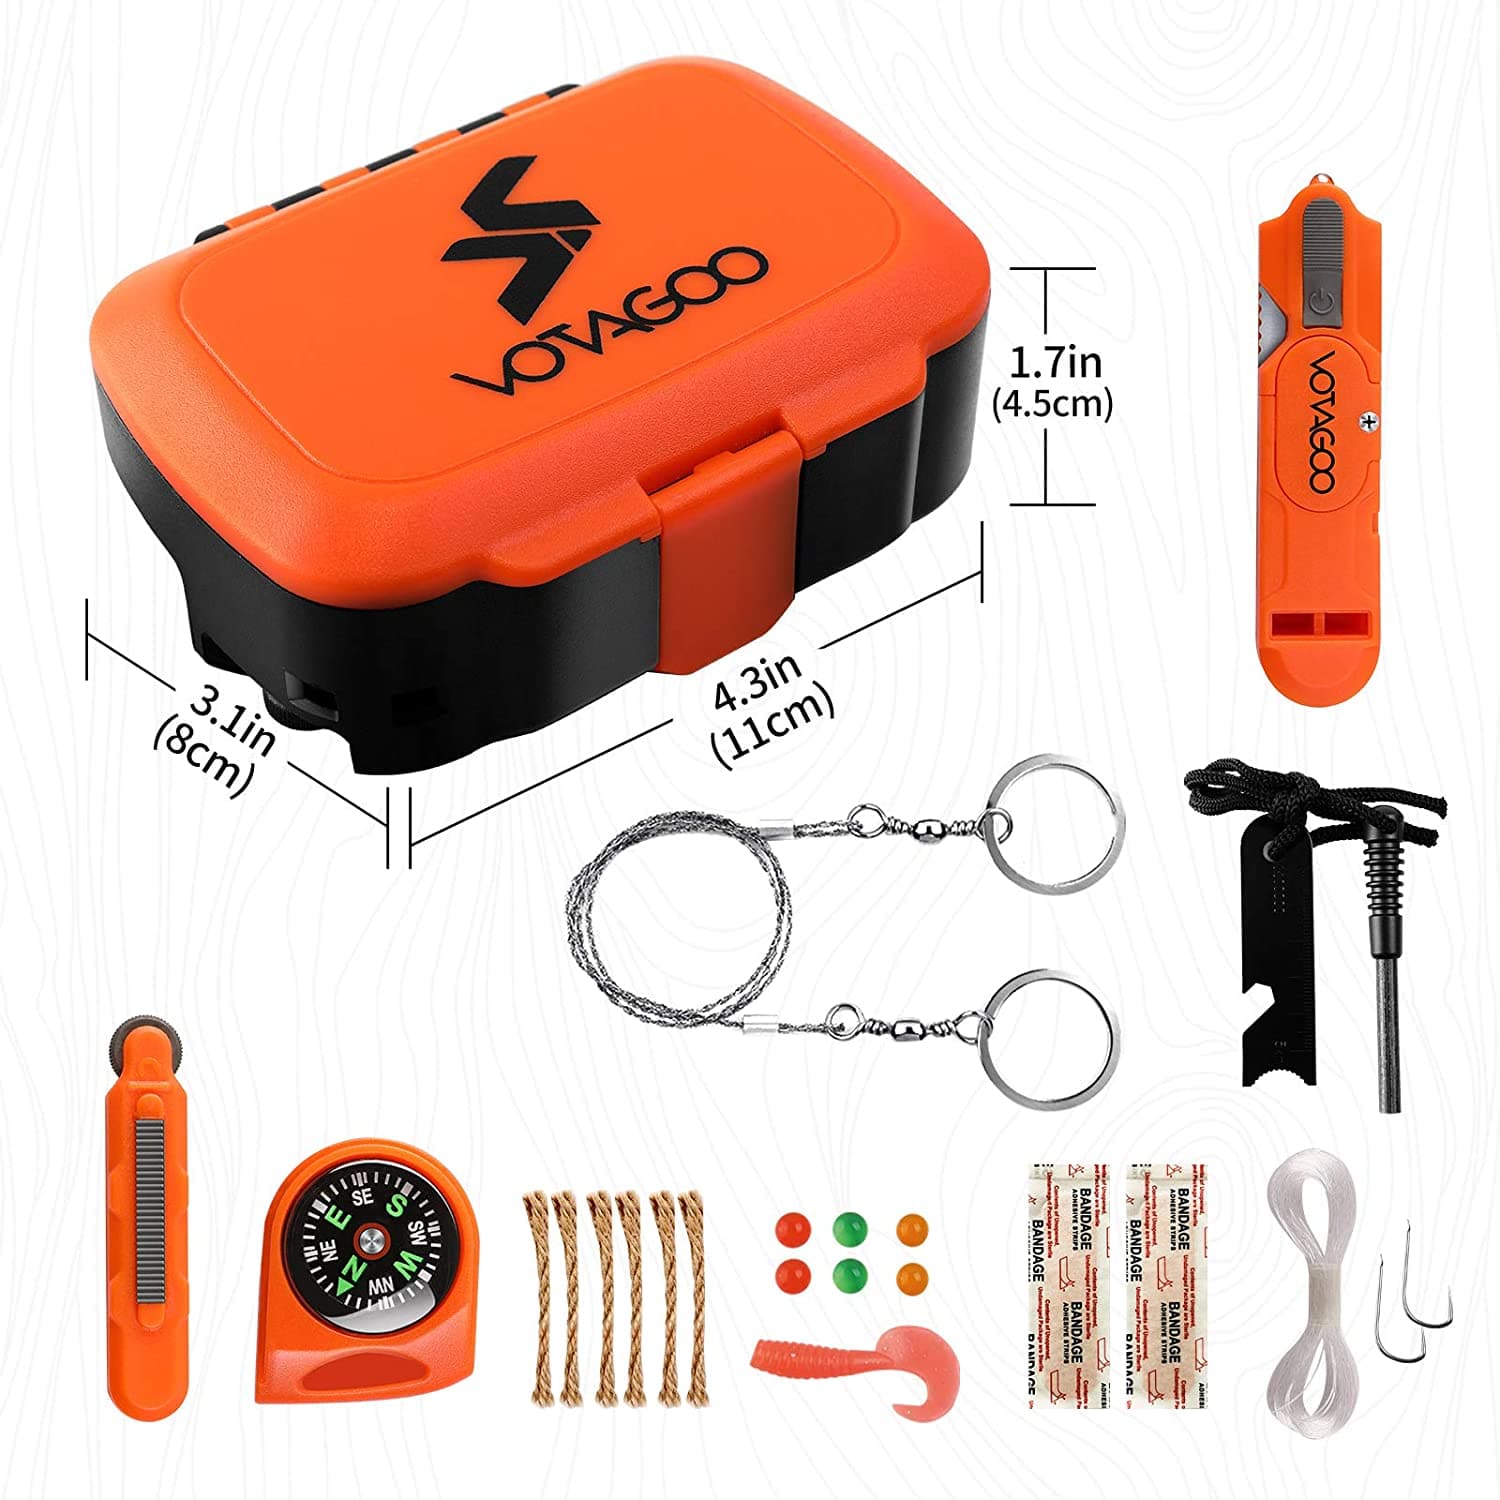 MDHAND Emergency Camping Survival Kit 11 in 1 Outdoor Survival Gear Tools